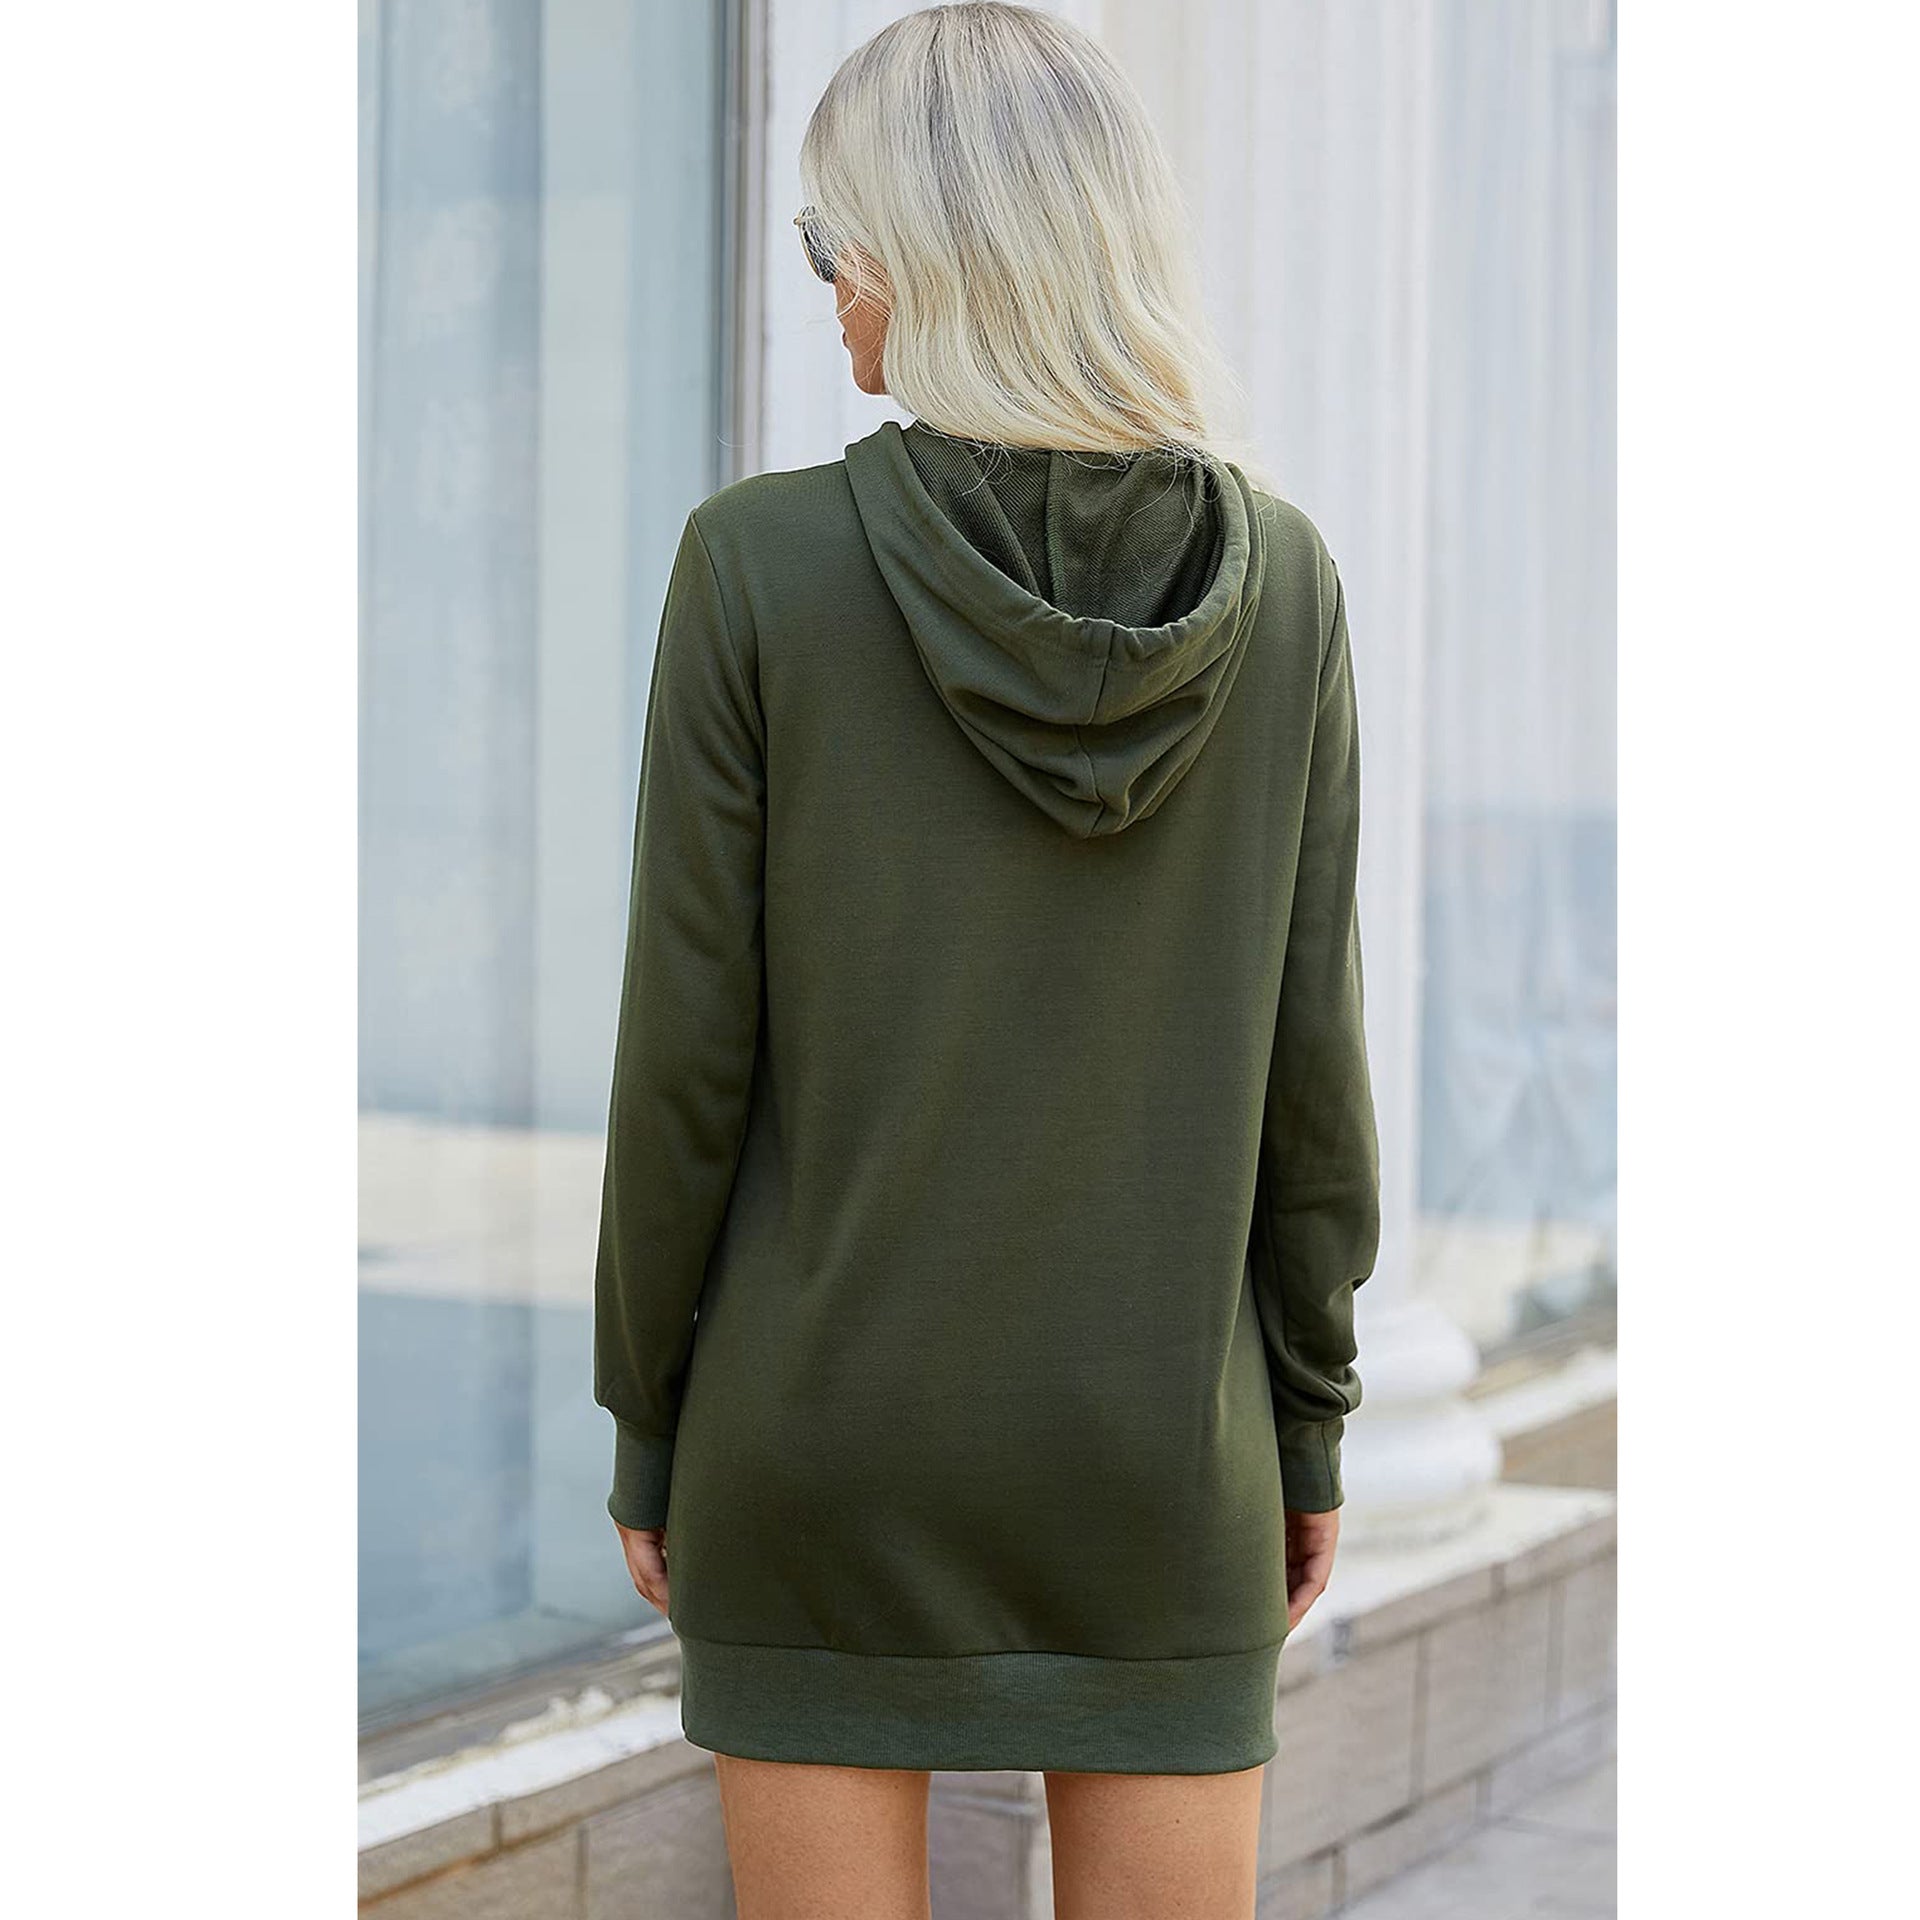 Women's Charming Unique Hooded Dress Casual Dresses